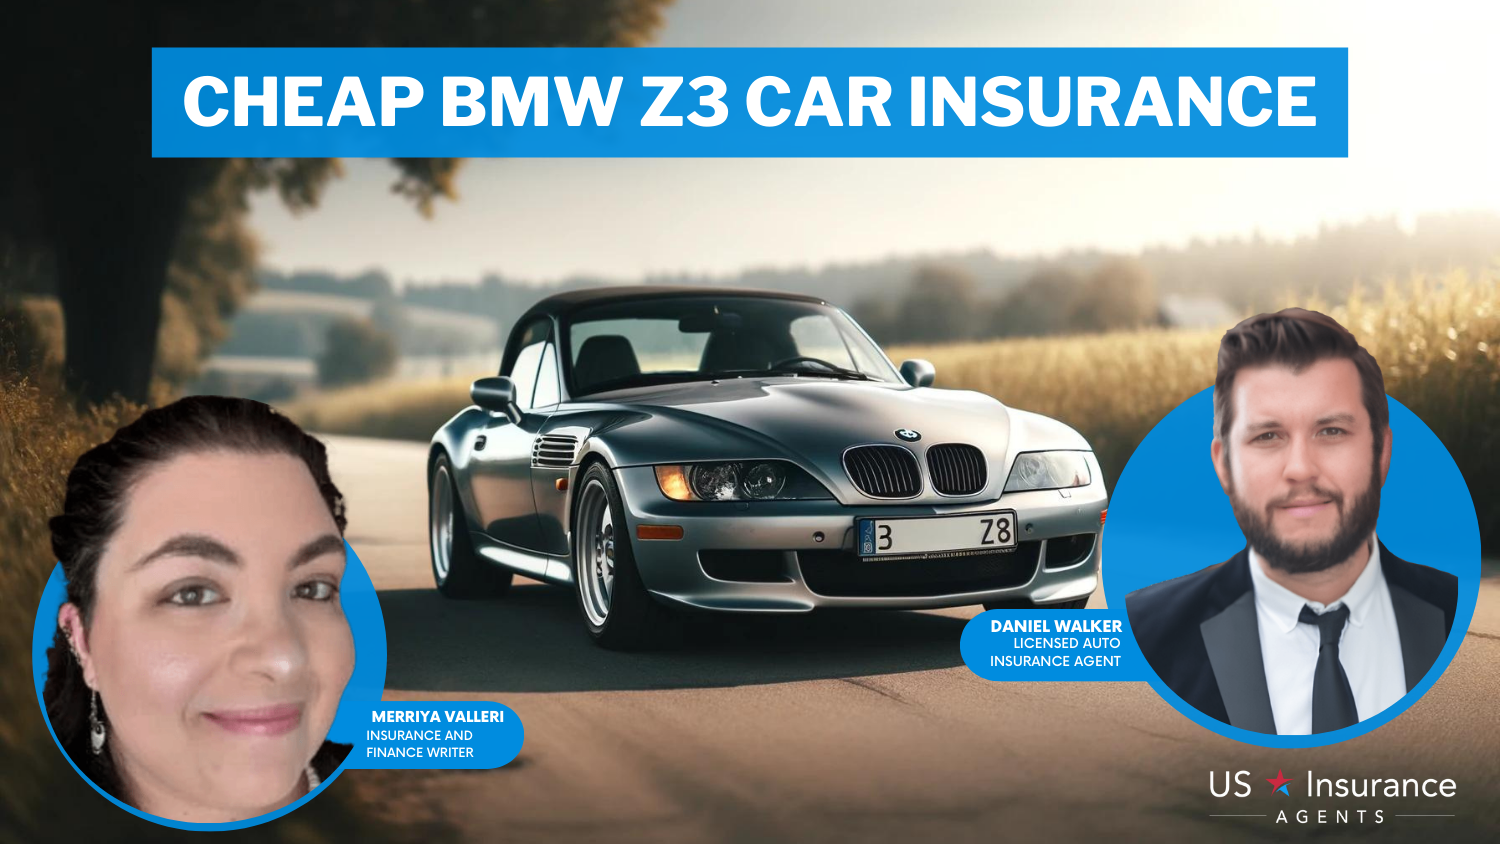 Cheap BMW Z3 Car Insurance: State Farm, Nationwide, and Erie